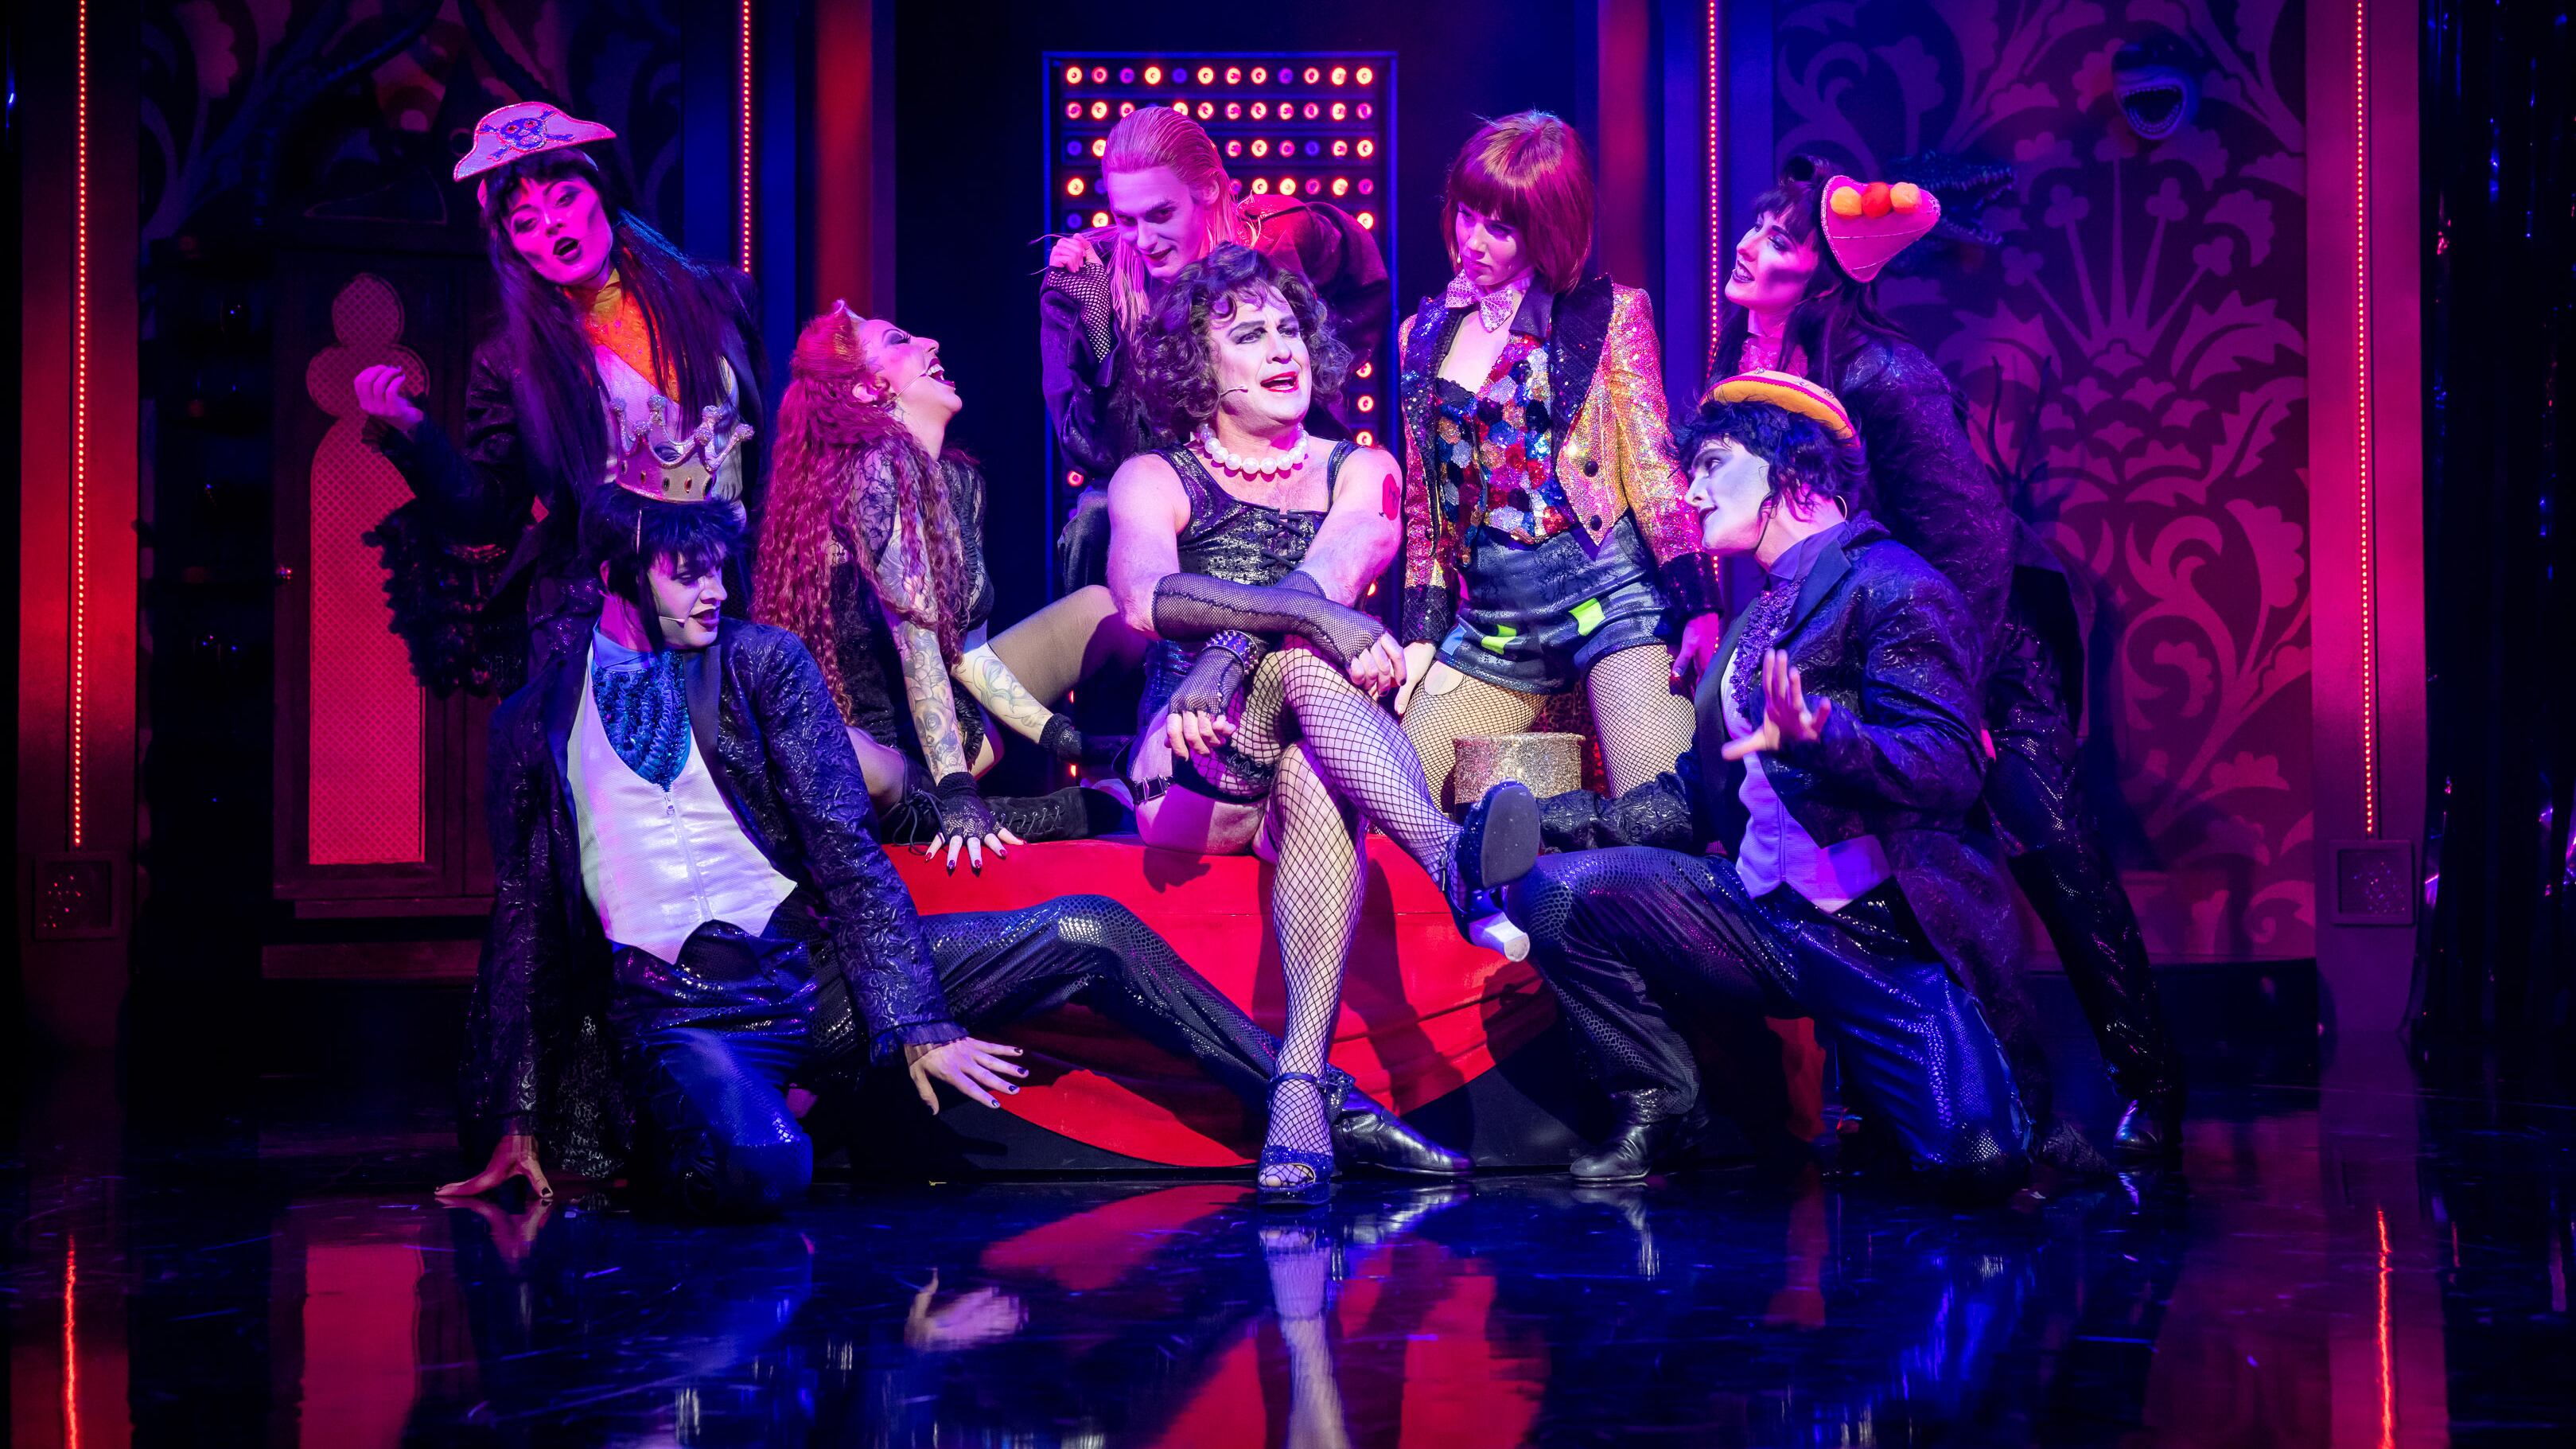 Jason Donovan joins the UK tour for The Rocky Horror Show and reprises his role as Frank ‘N’ Furter